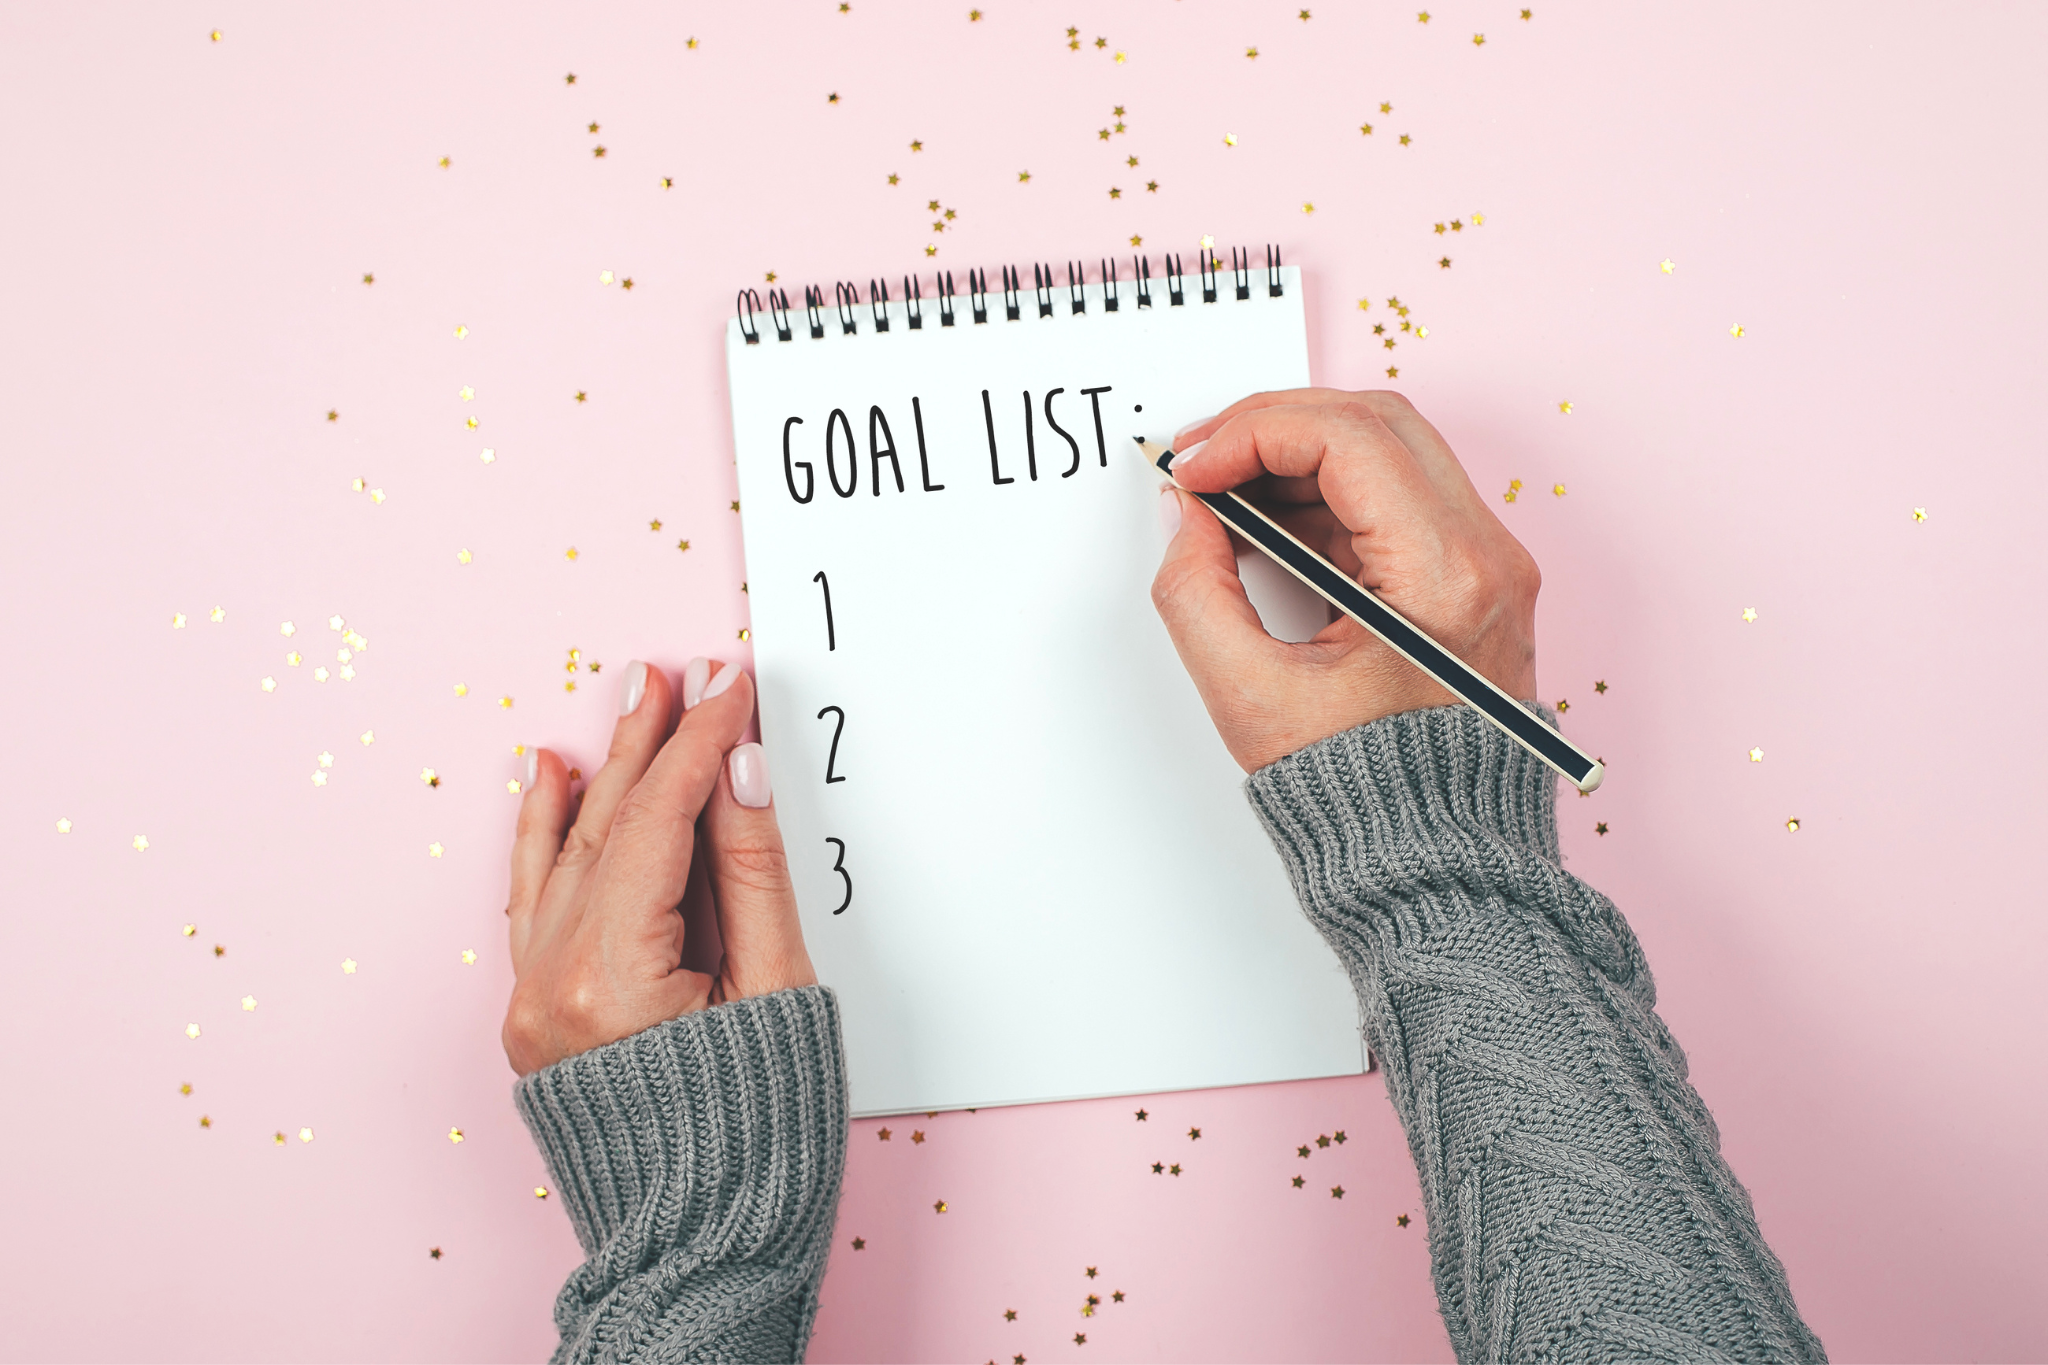 Woman writes a goal list on a pink background with glitter